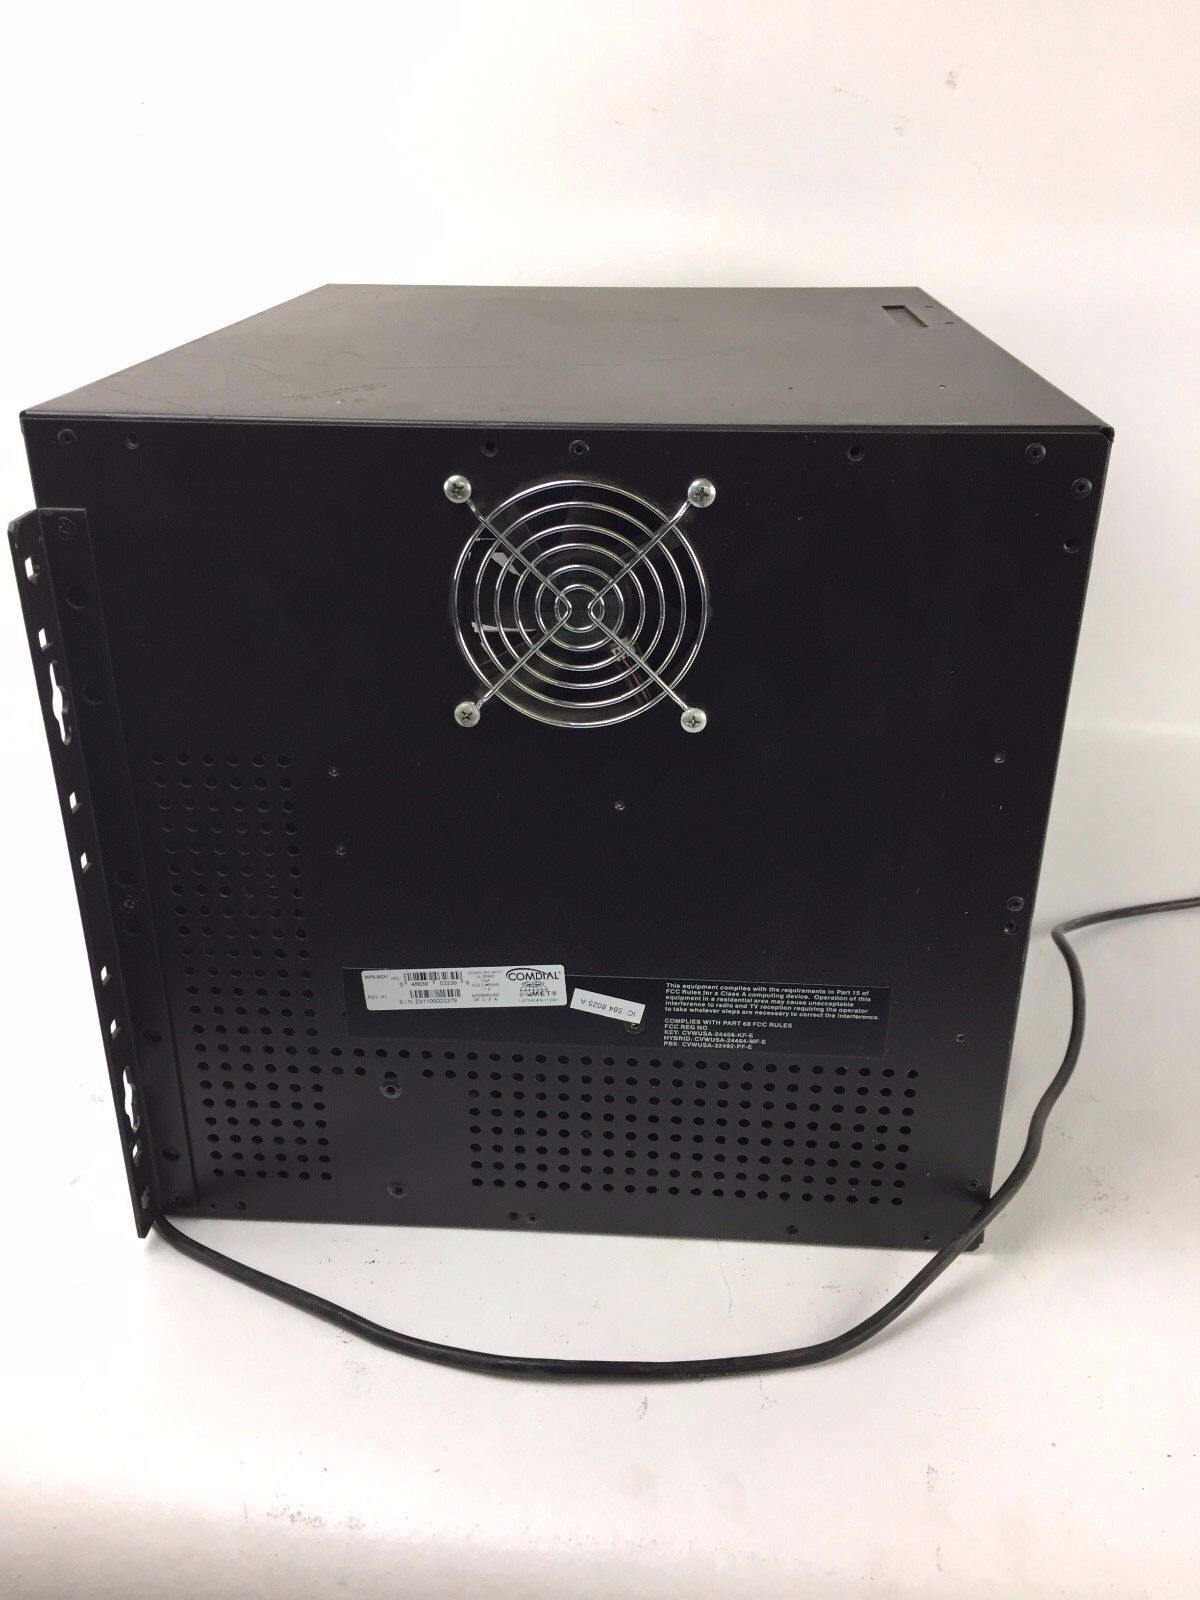 Comdial Vertical MP5-BCH Main Expansion Cabinet Needs Power Cord